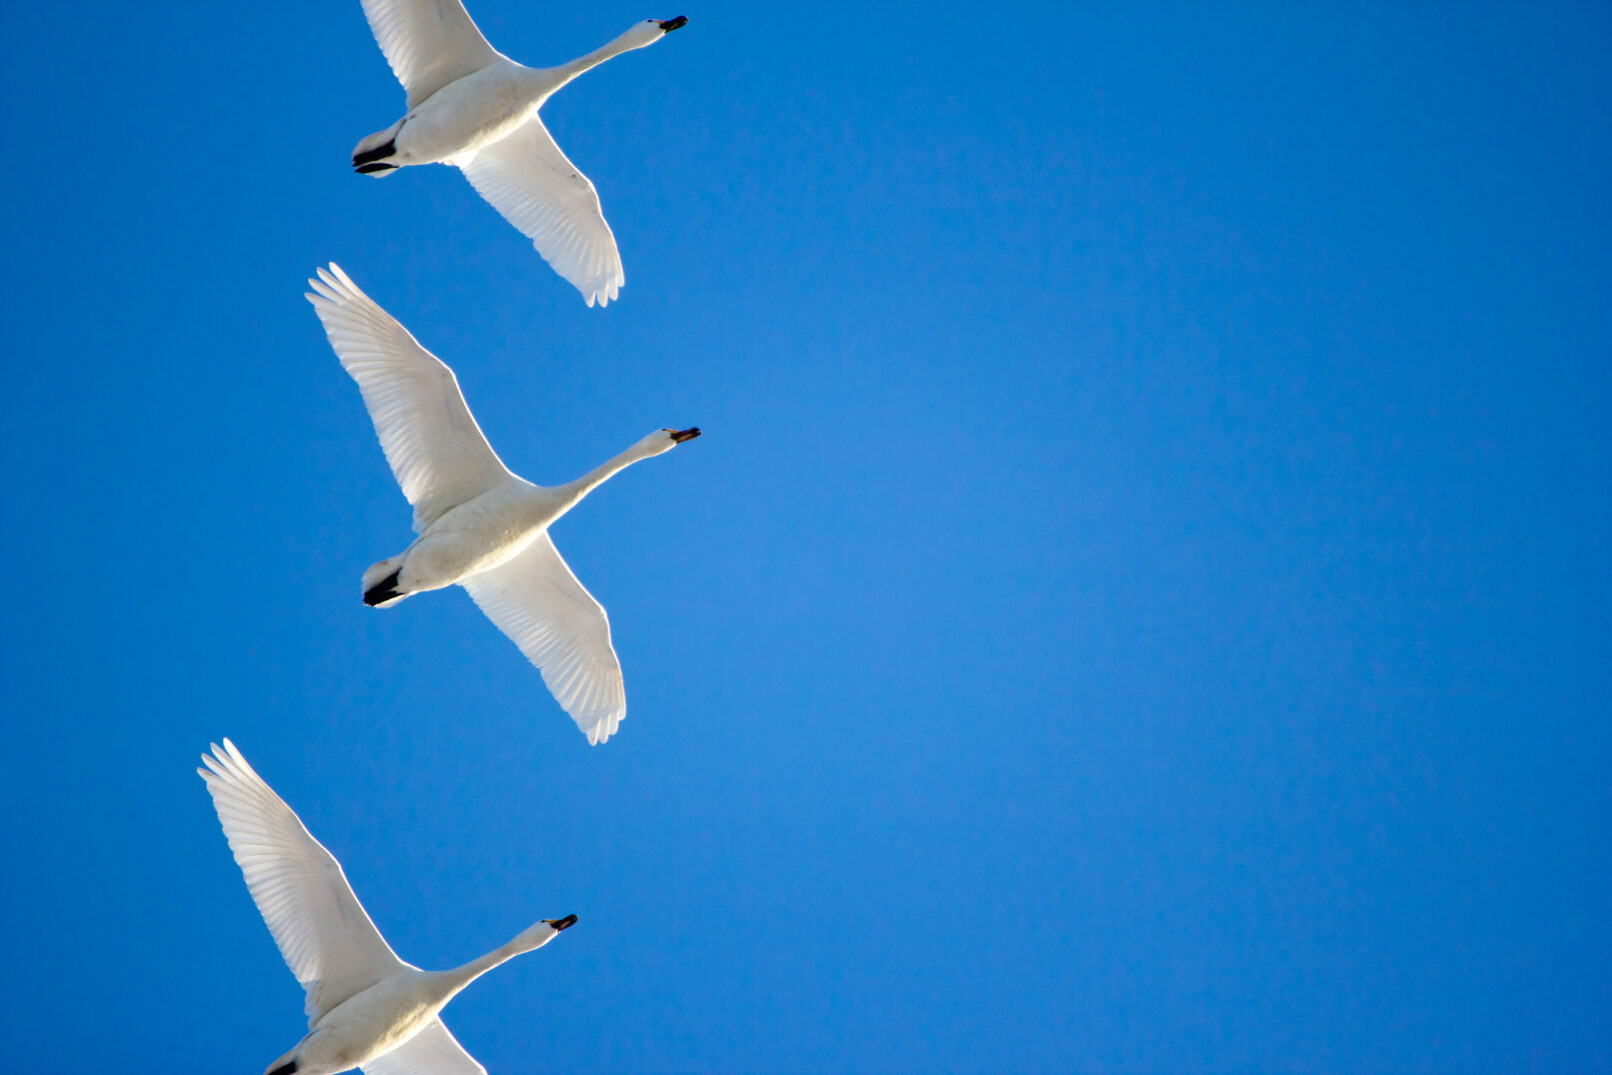 Swans in a clear blue sky